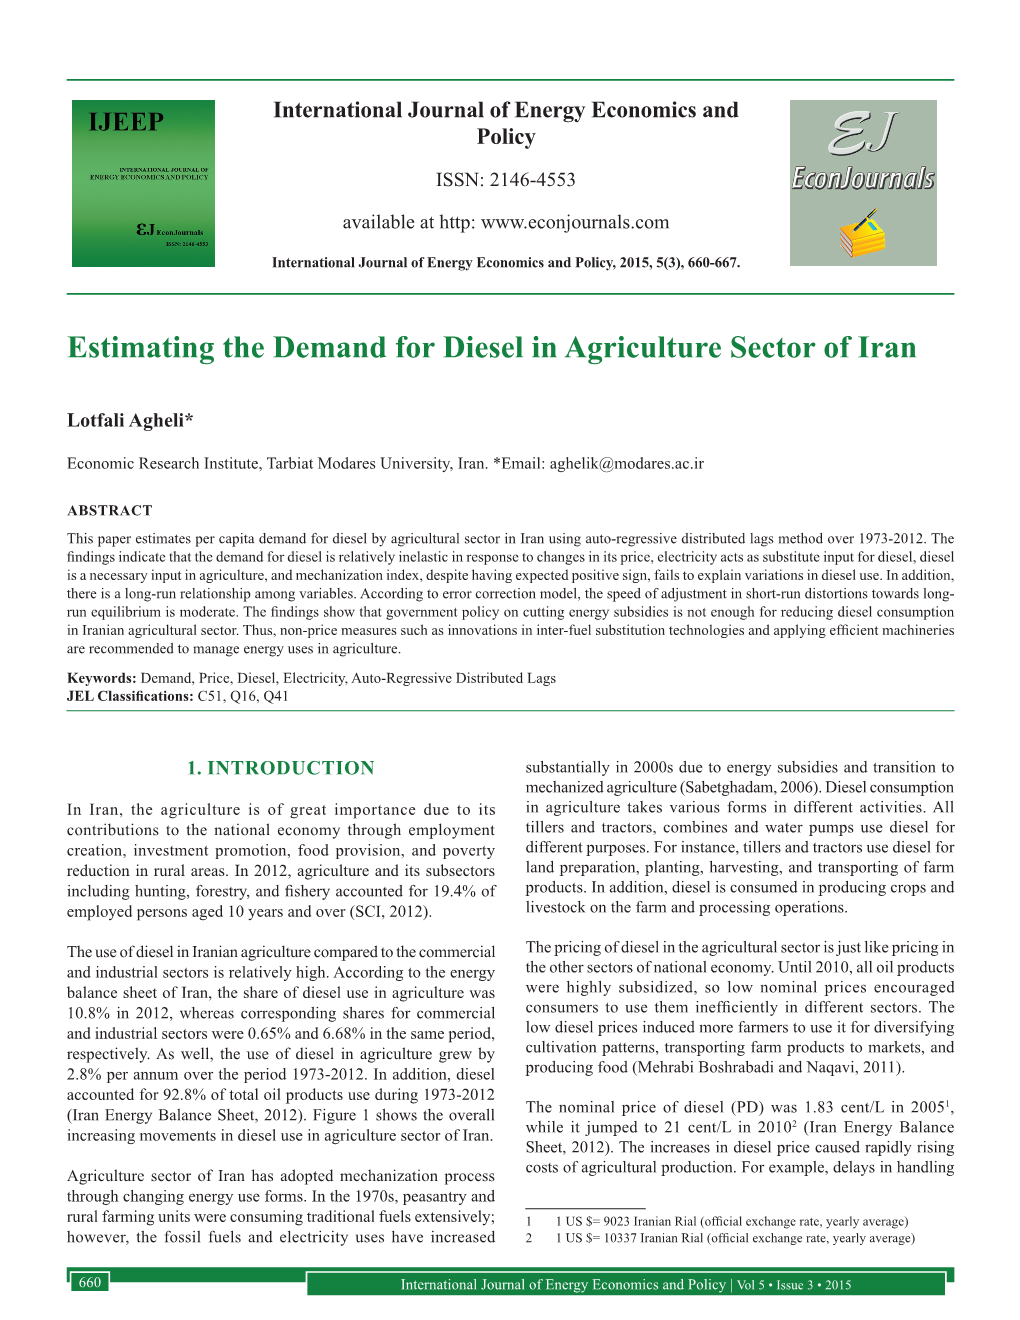 Estimating the Demand for Diesel in Agriculture Sector of Iran